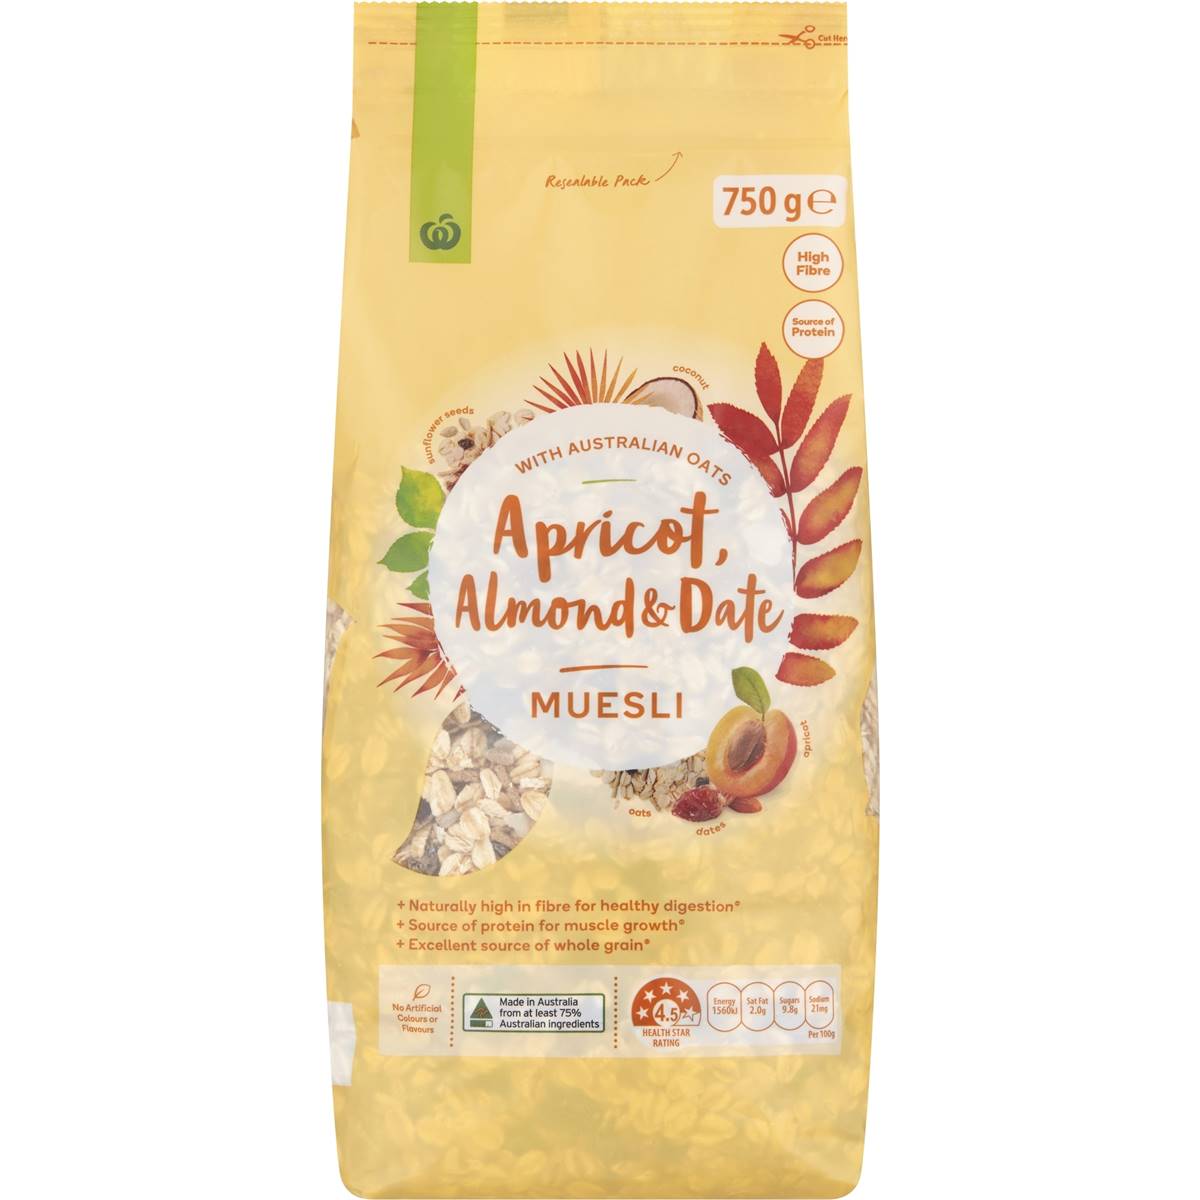 Calories in Woolworths Apricot Almond And Date Muesli